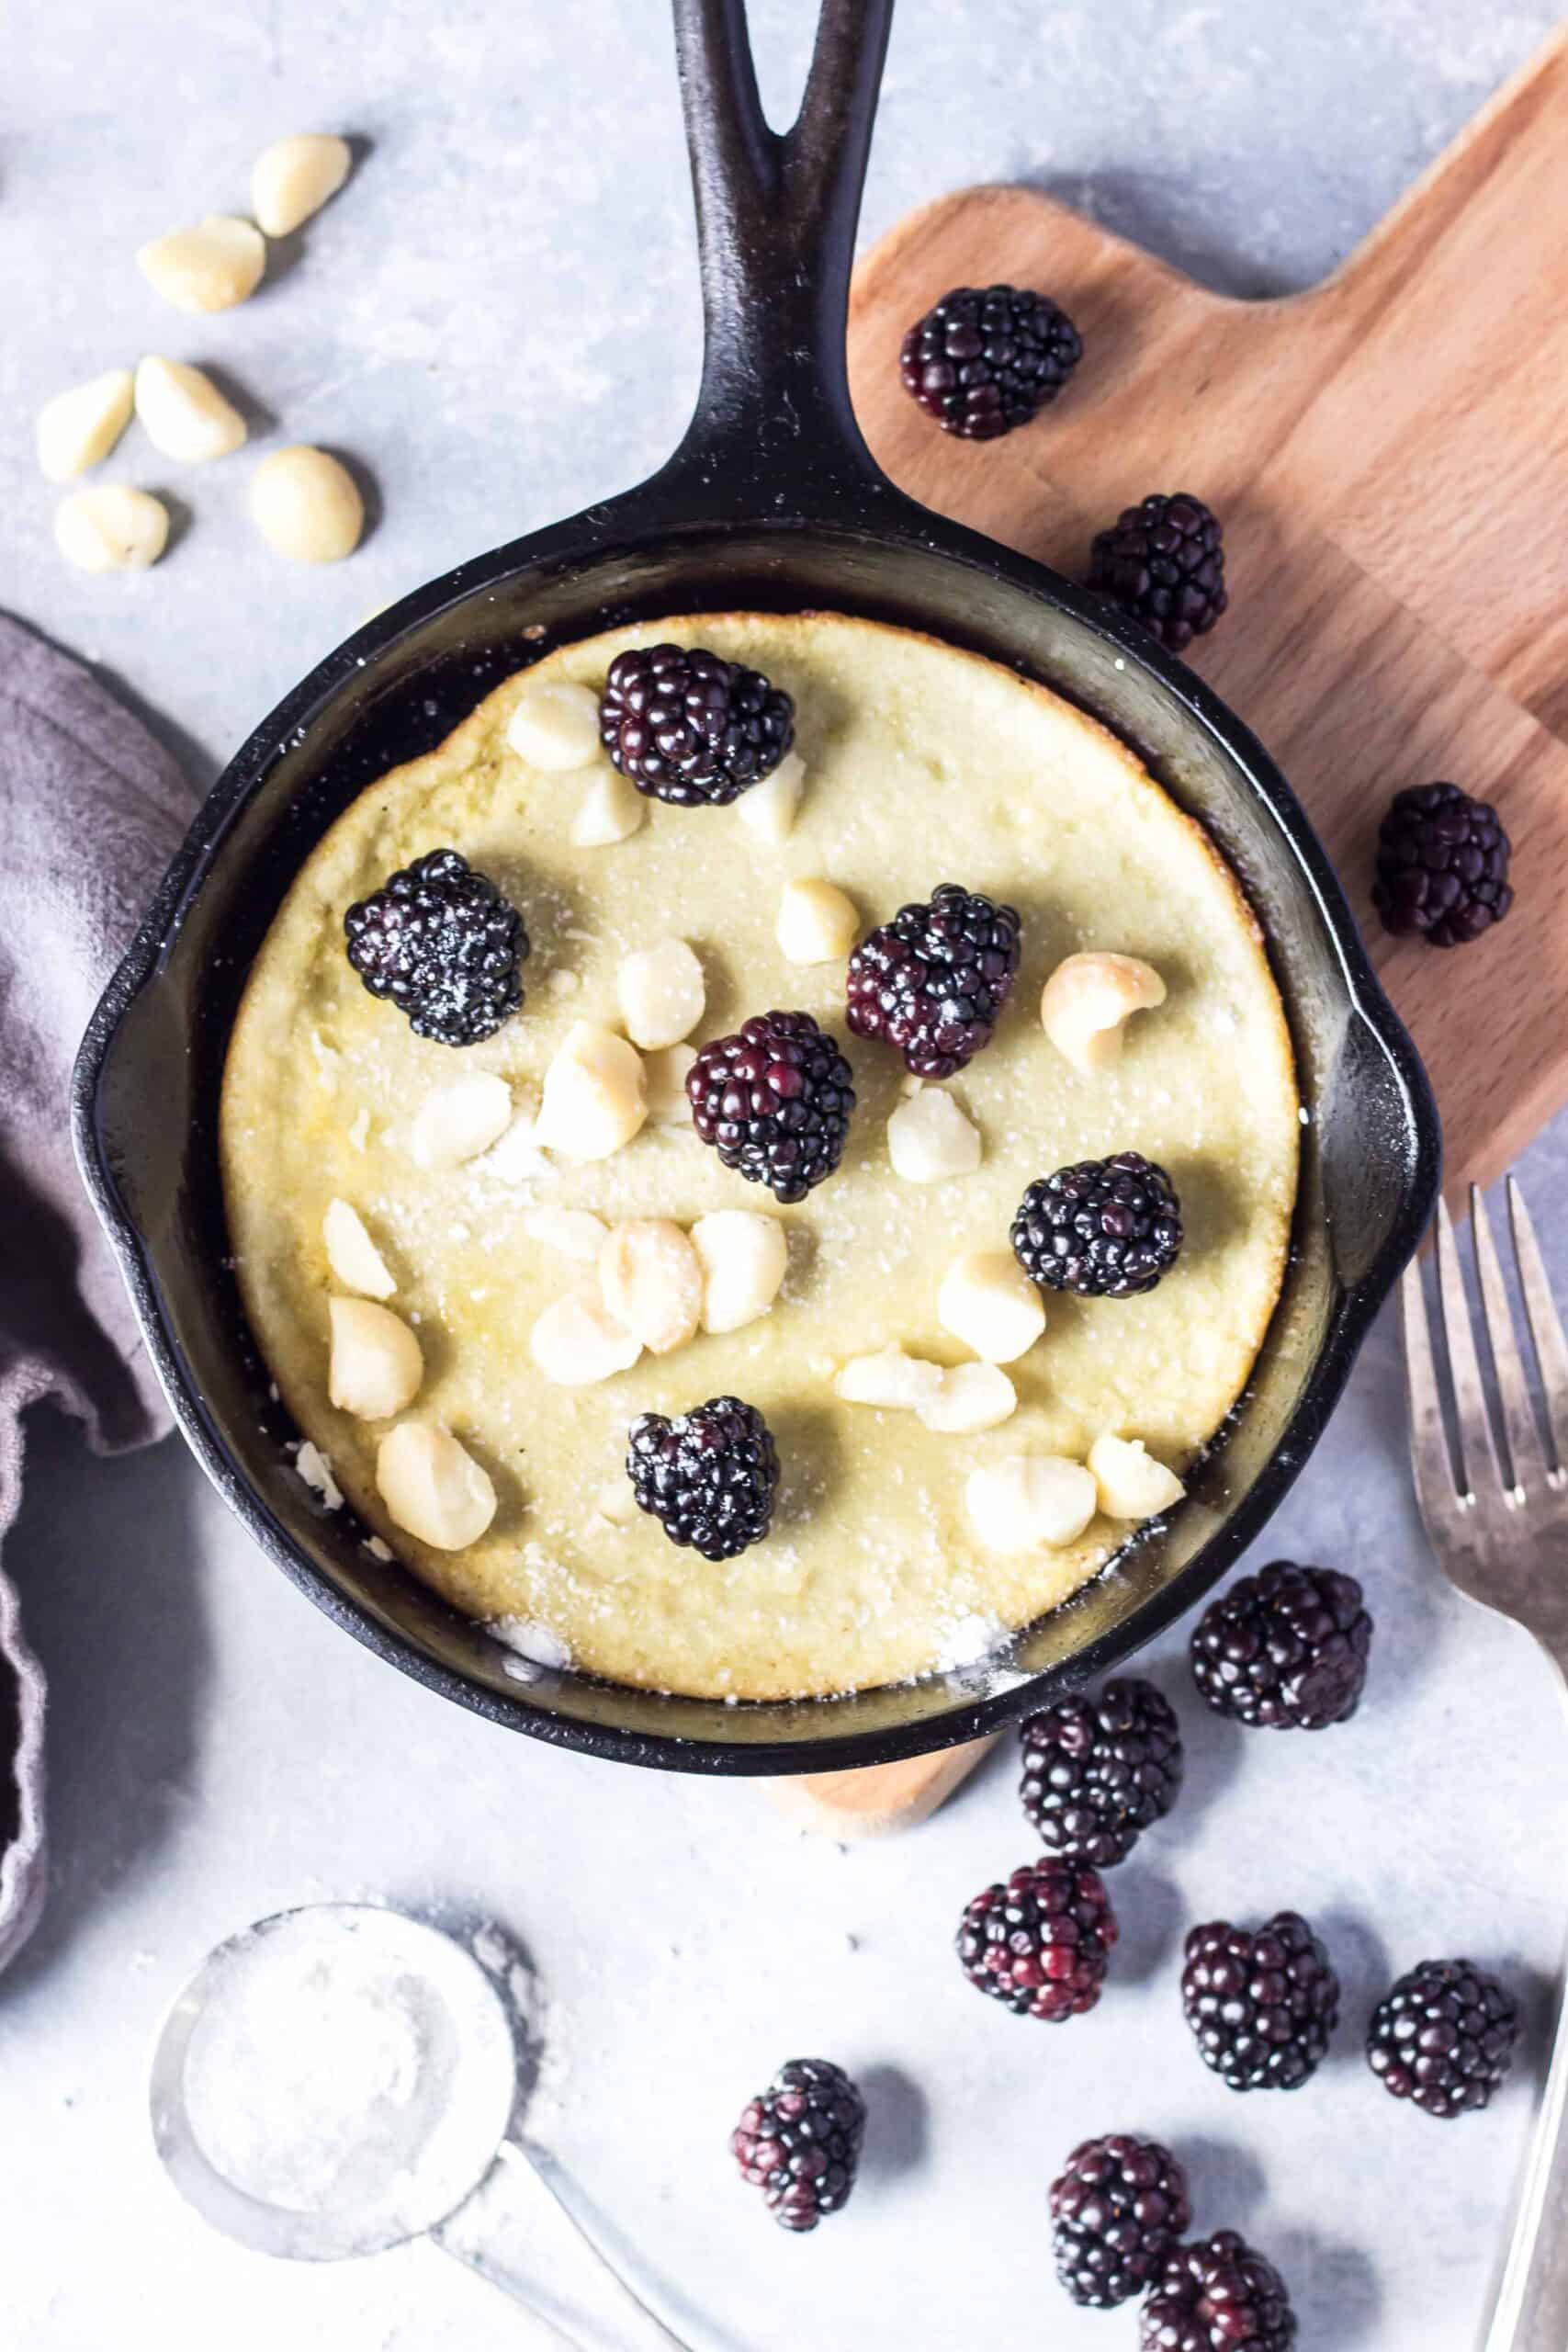 Keto Dutch Baby in a small cast iron skillet topped with blackberries and macadamia nuts